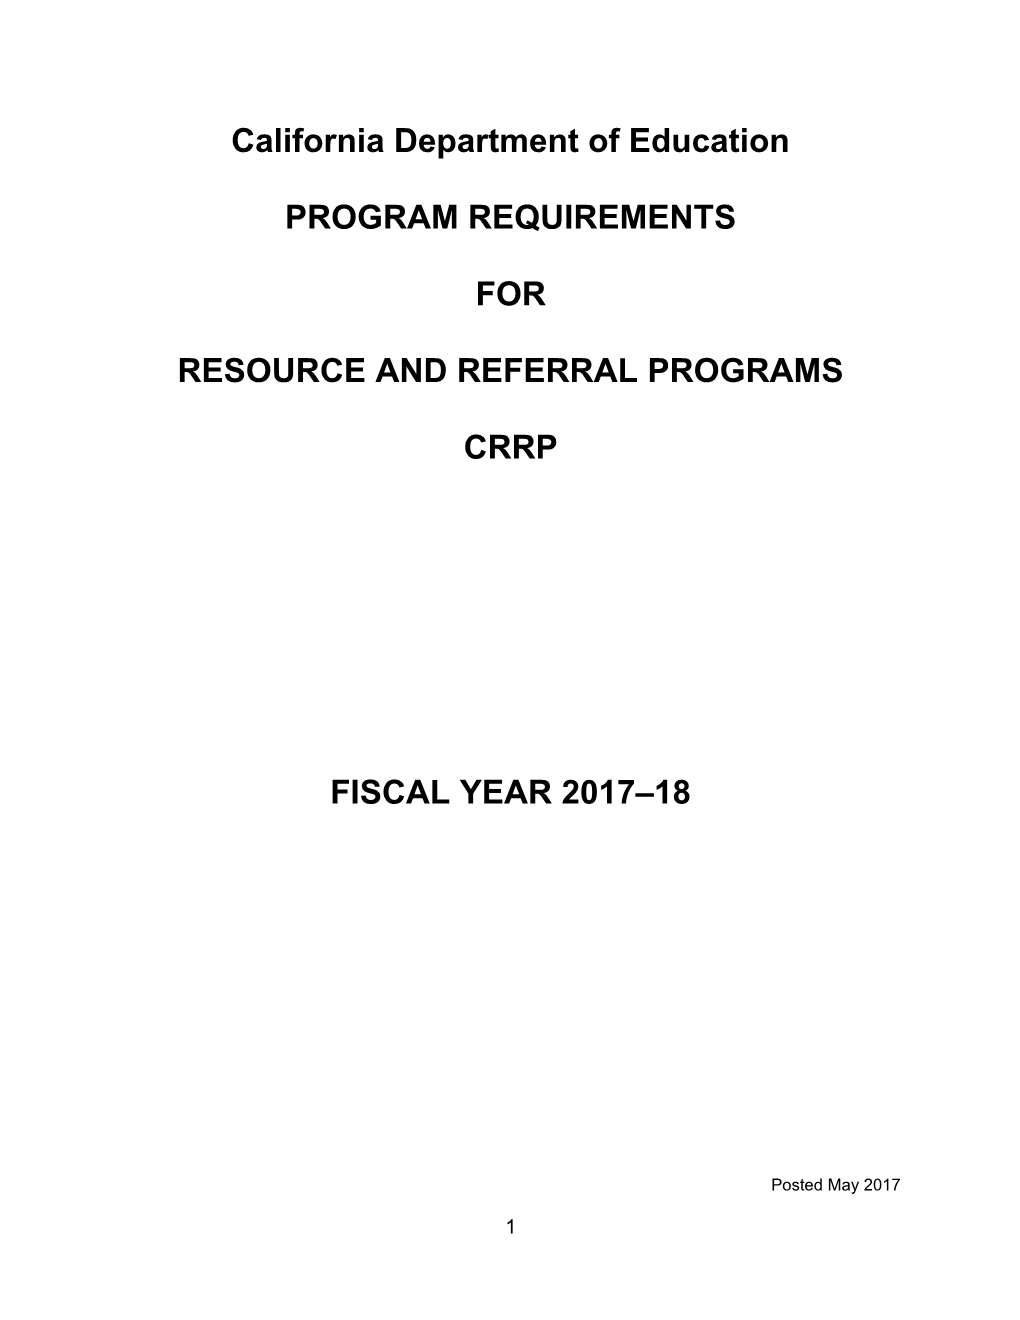 2017-18 CRRP Resource and Referral Program - Child Development (CA Dept of Education)